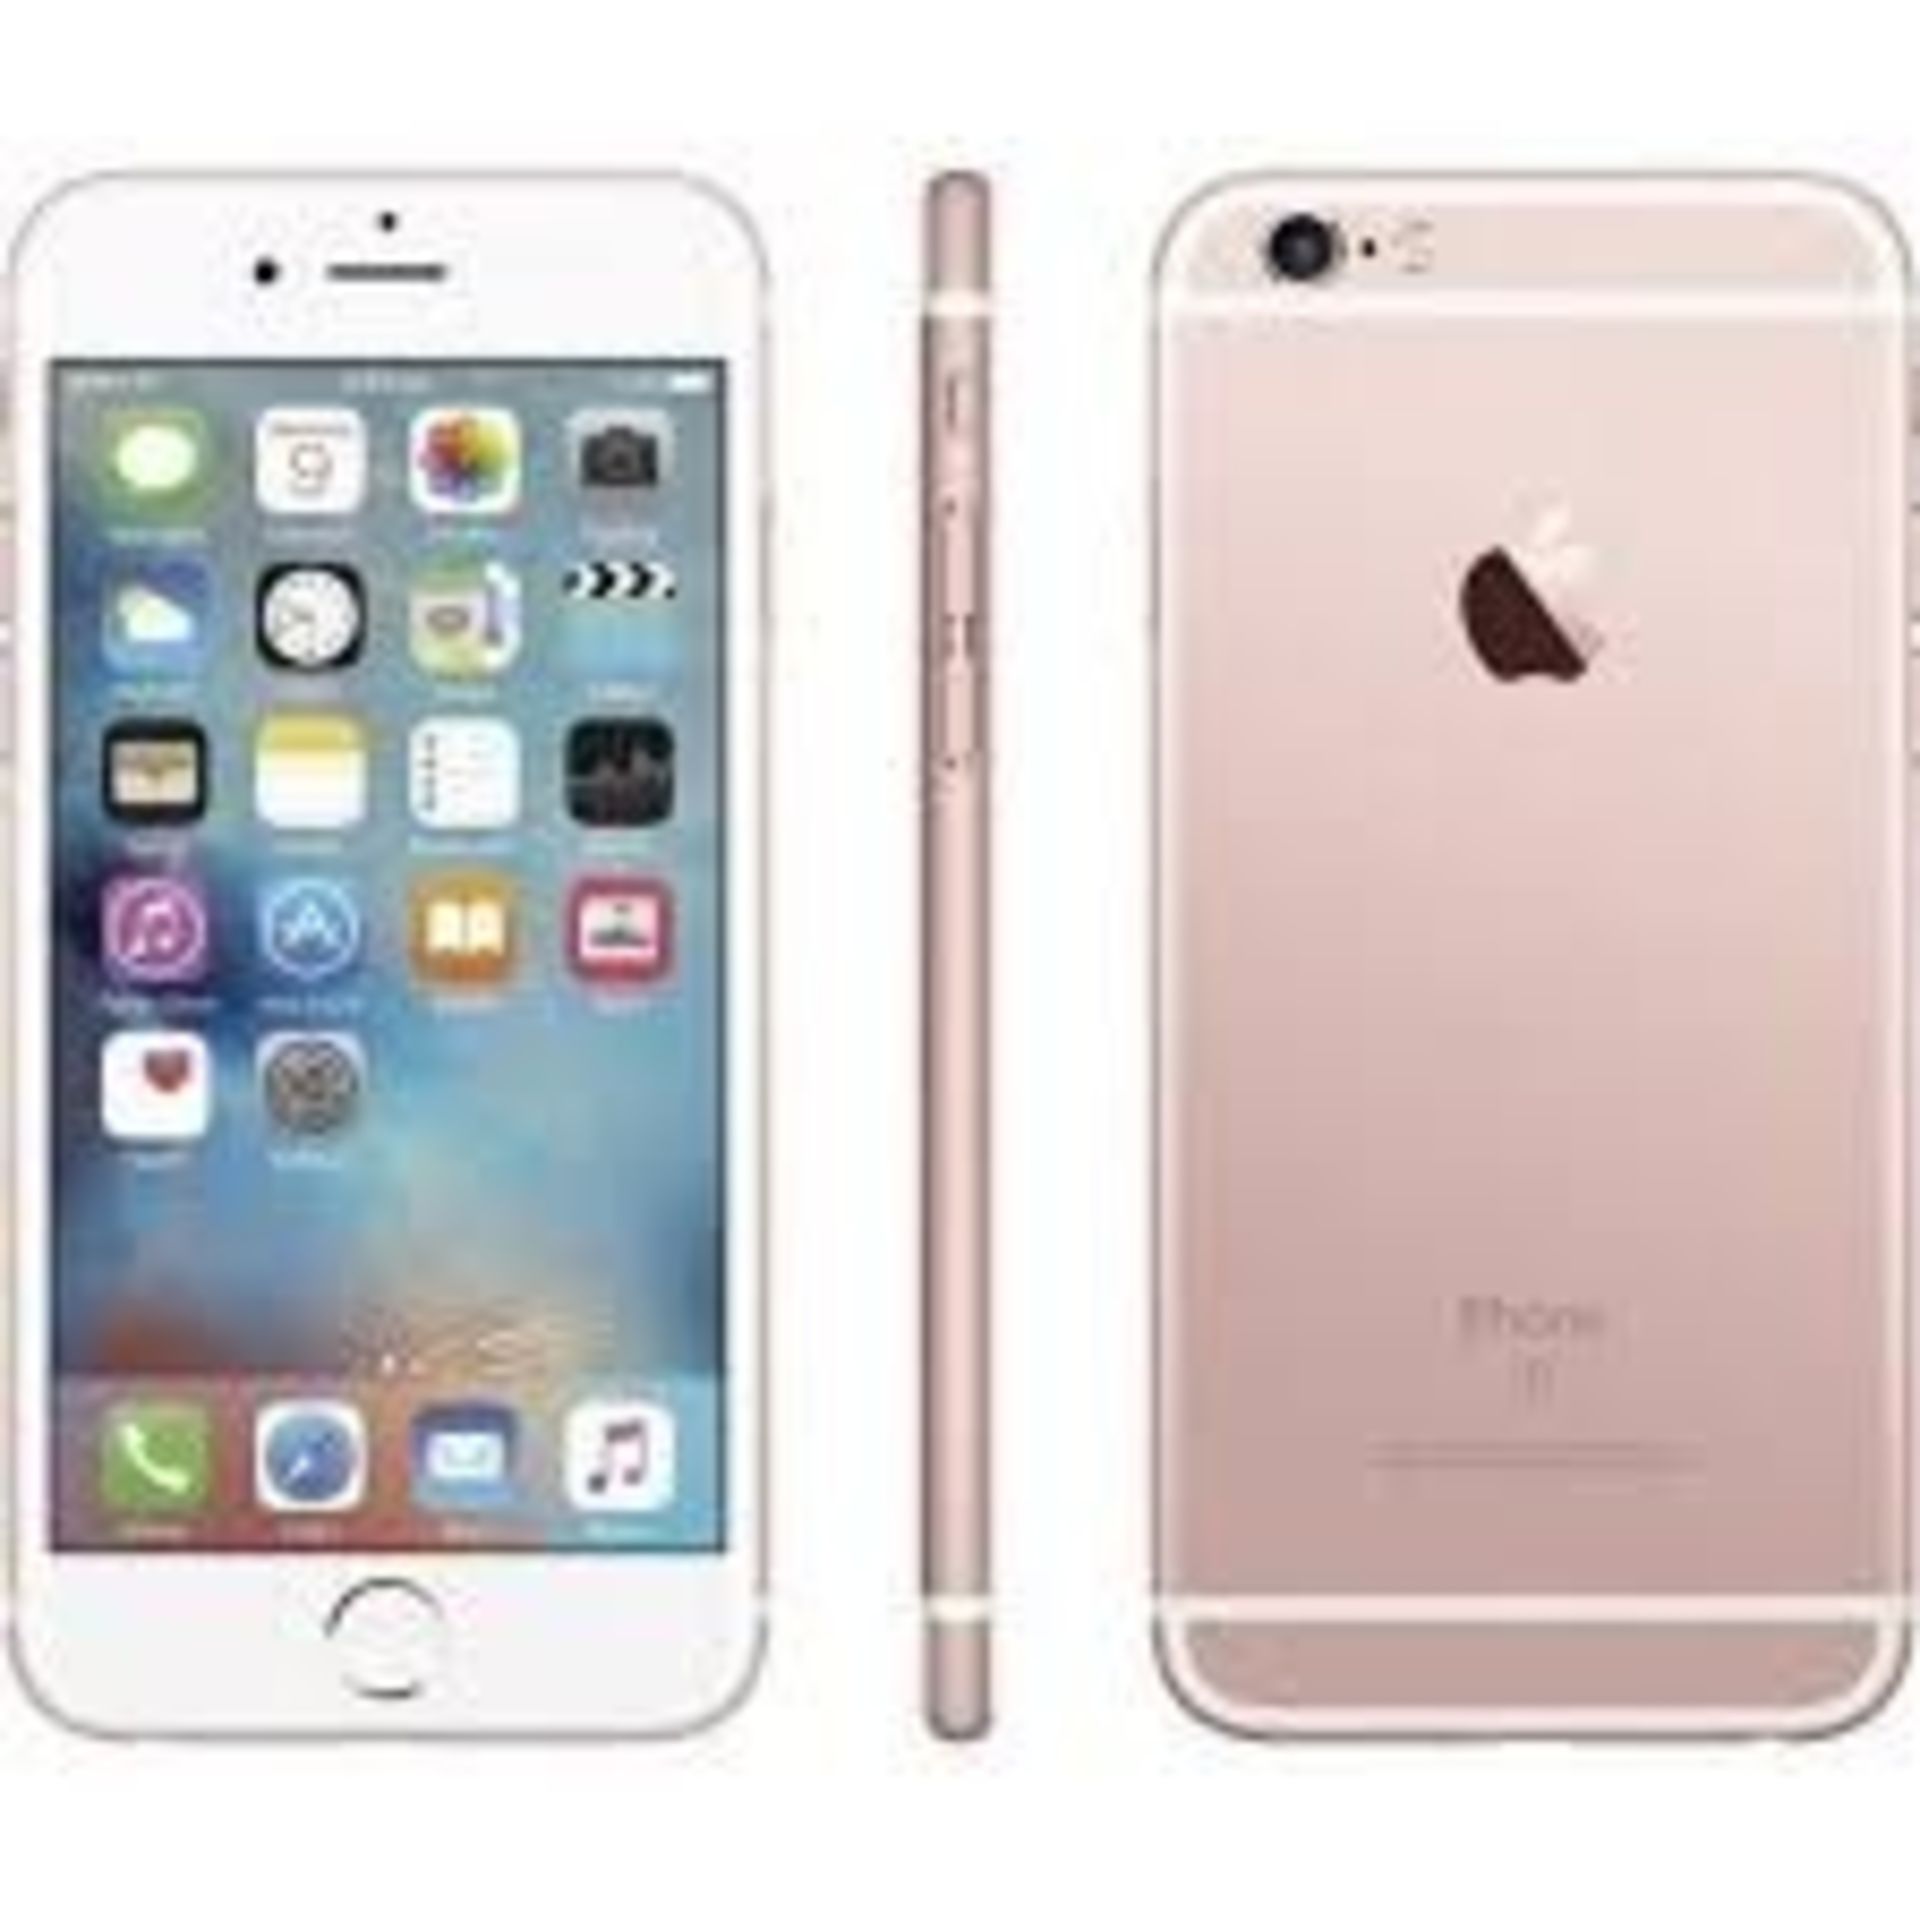 Apple iPhone 6s+ 32GB Rose Gold Grade A - Perfect Working Condition RRP £349 (Fully refurbished